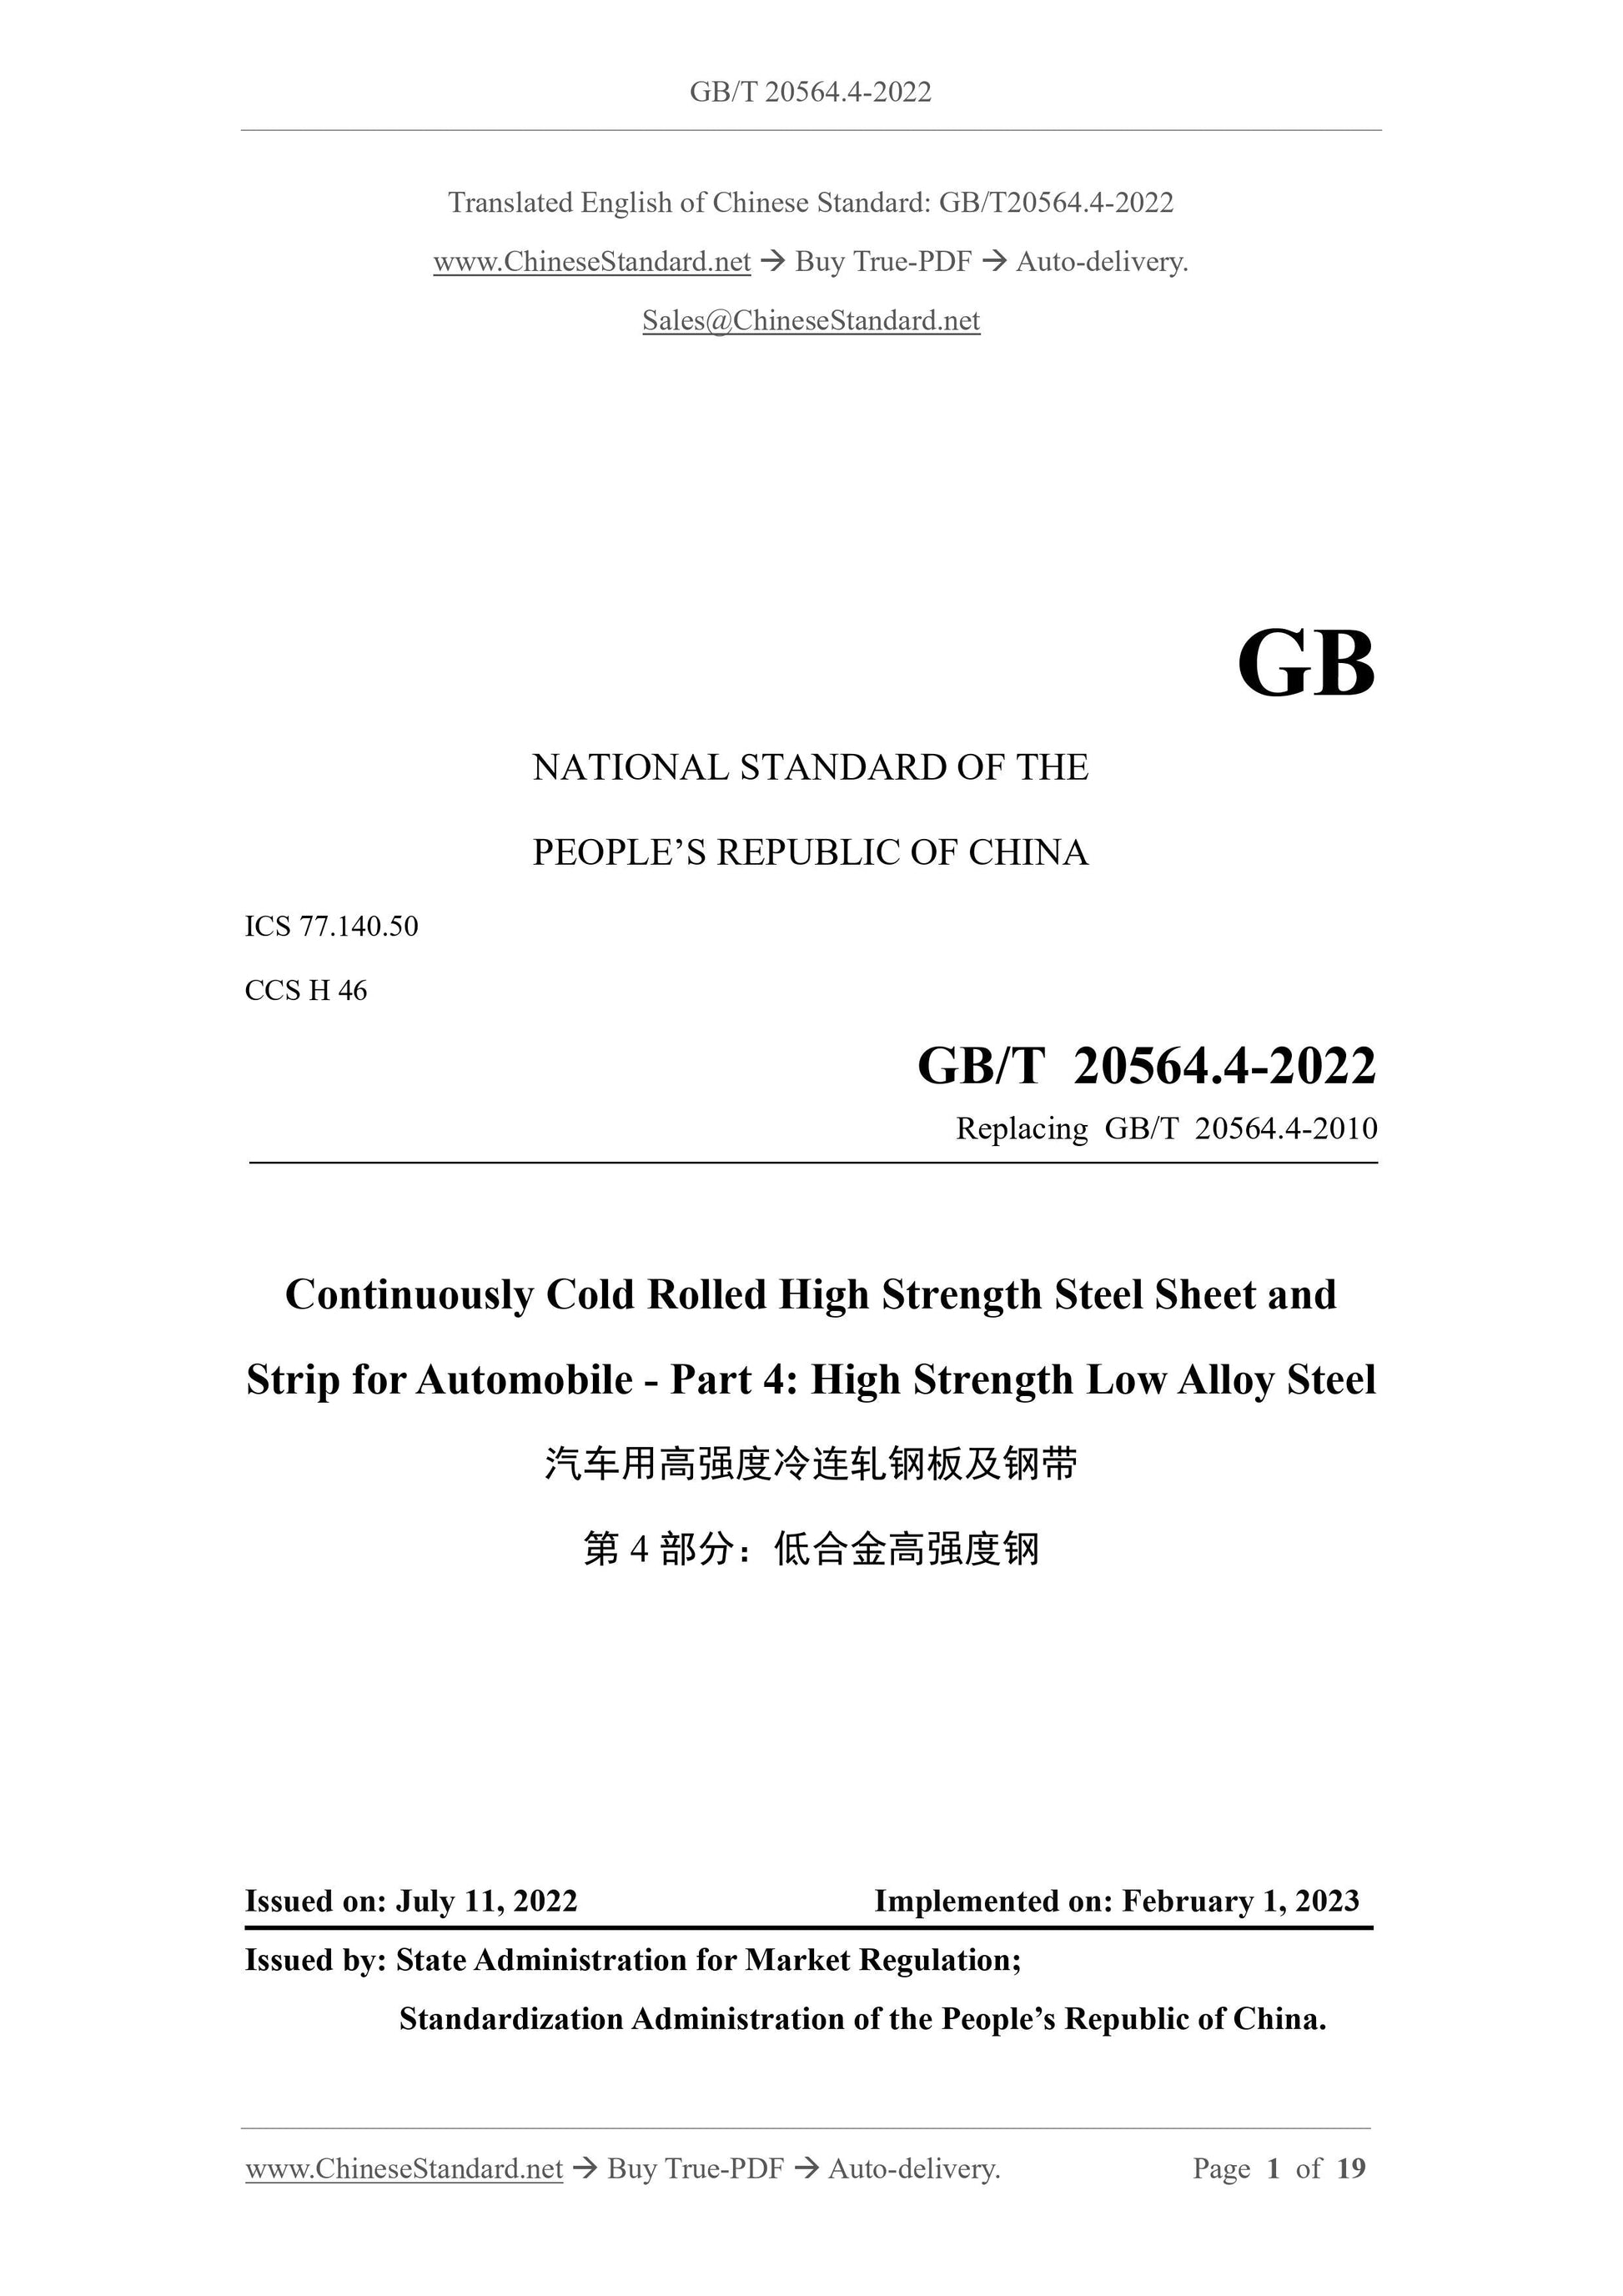 GB/T 20564.4-2022 Page 1